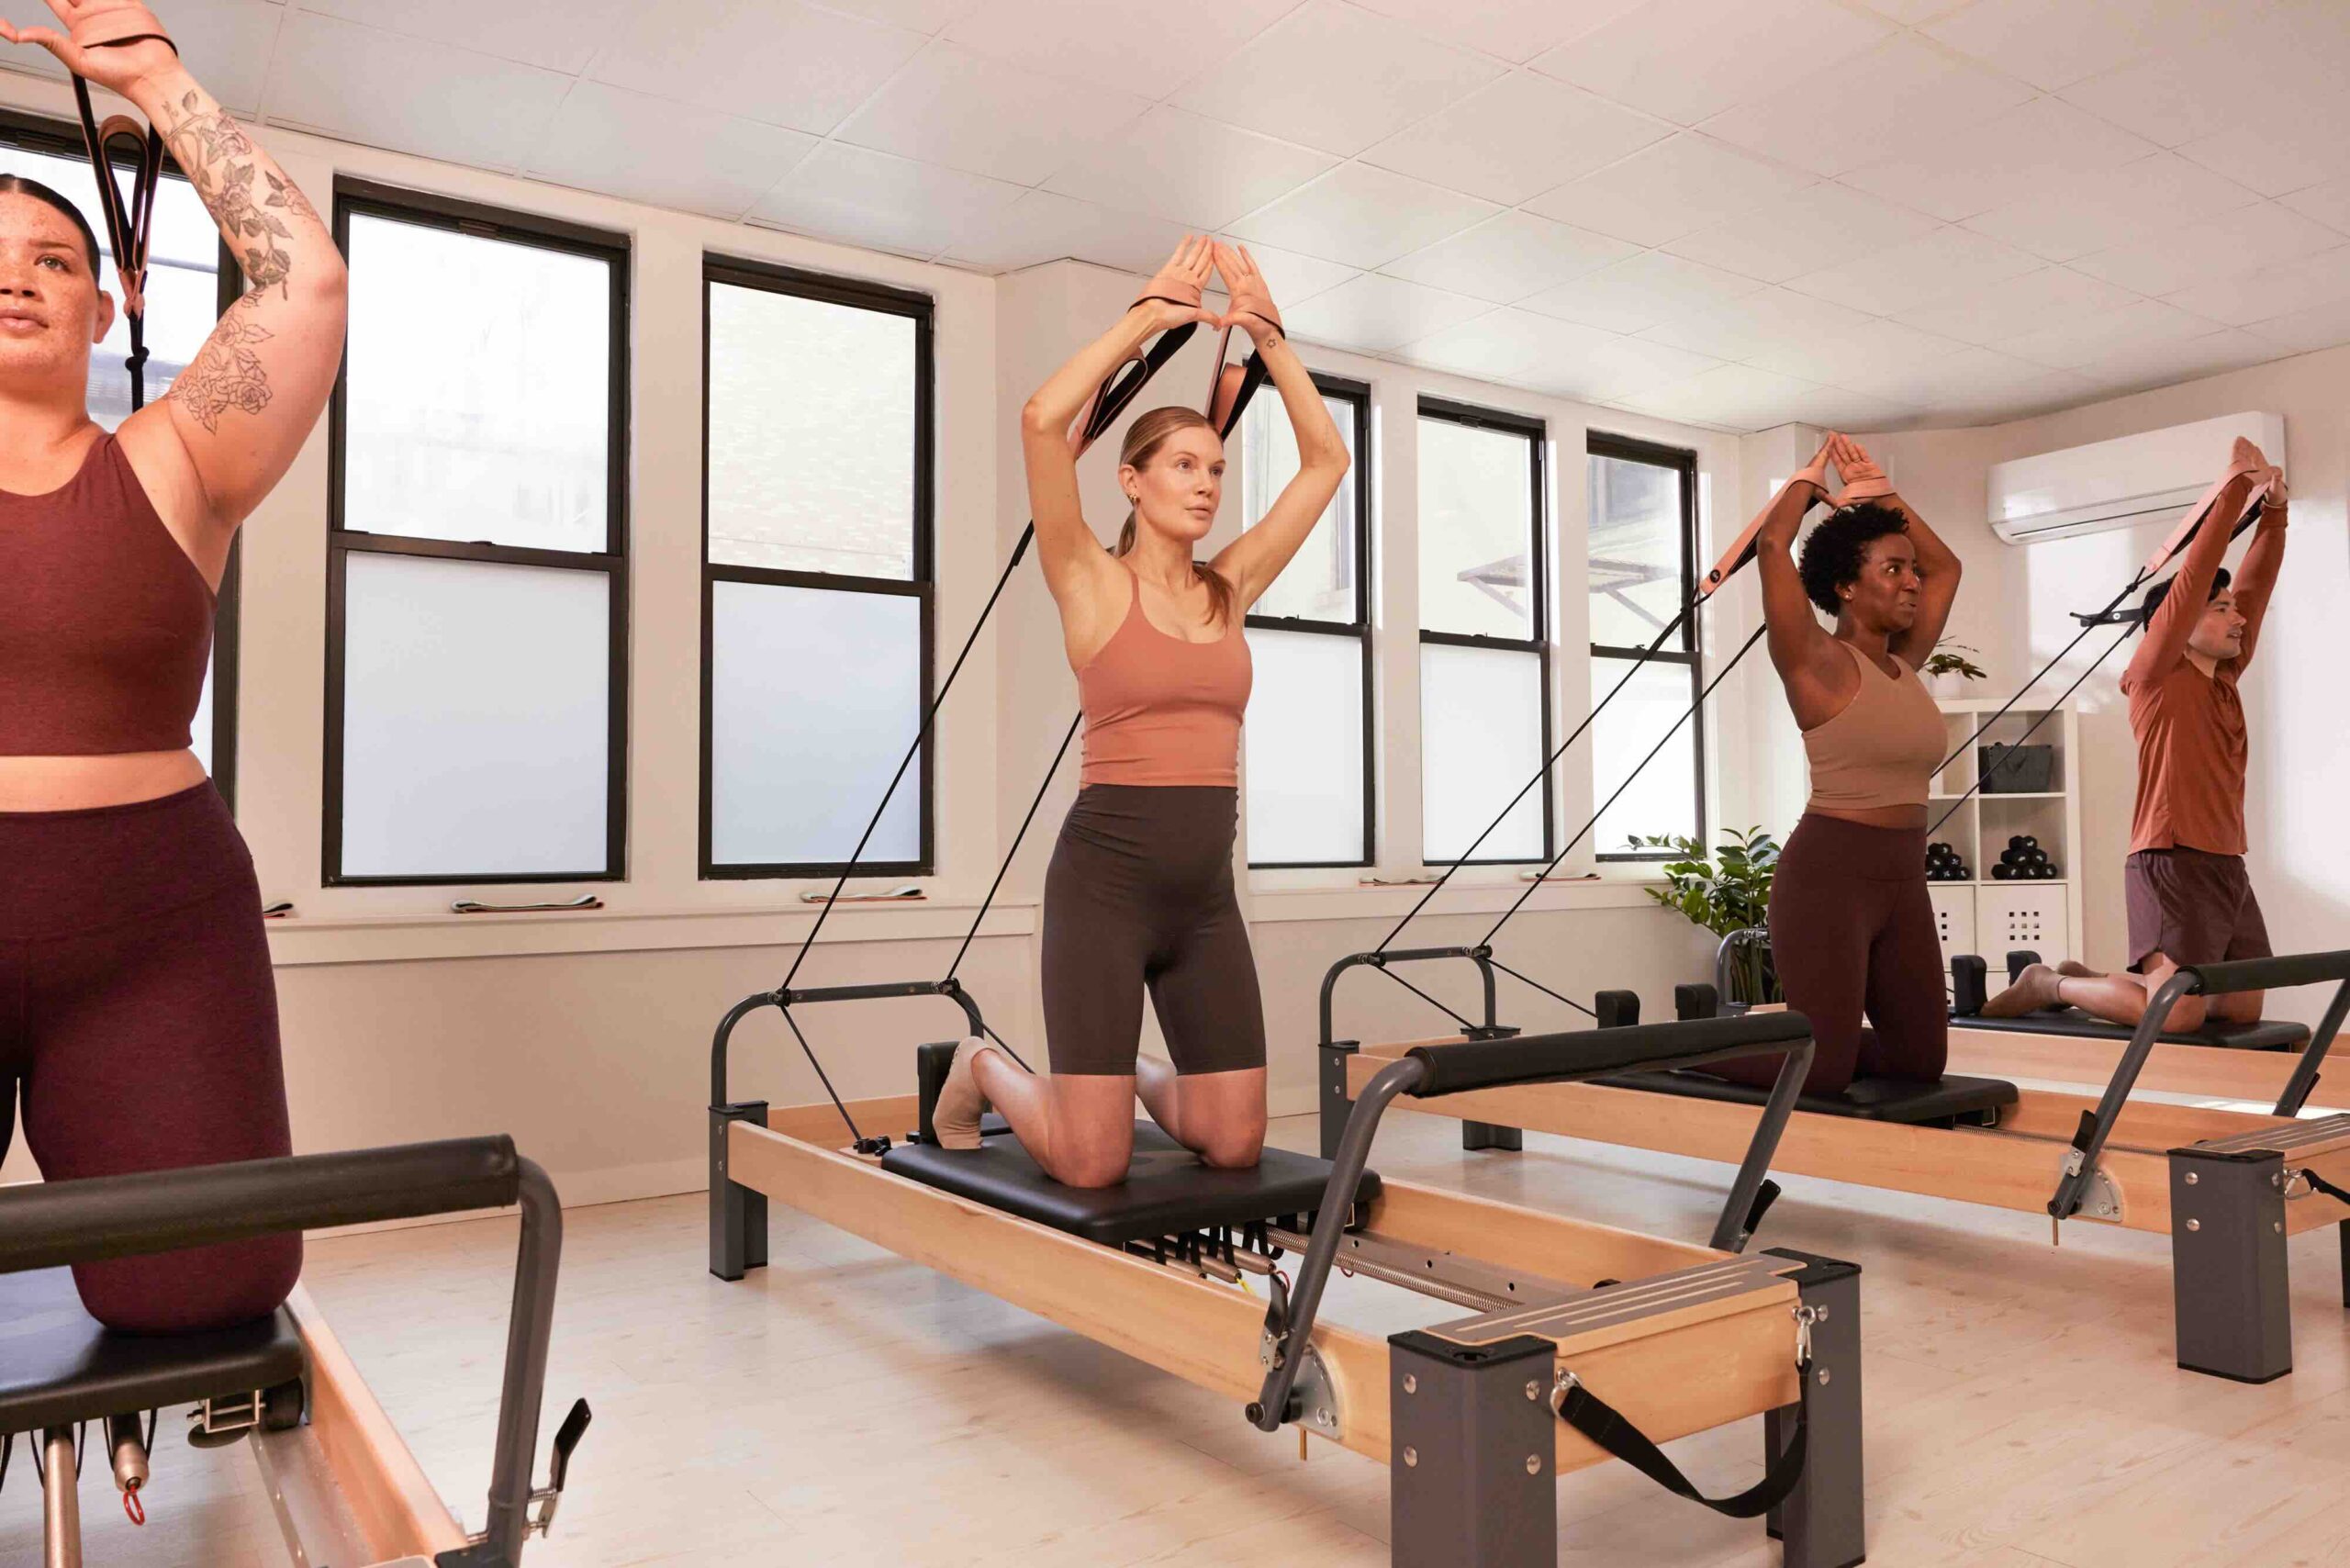 Classical vs Contemporary Pilates - What are the Key Differences?